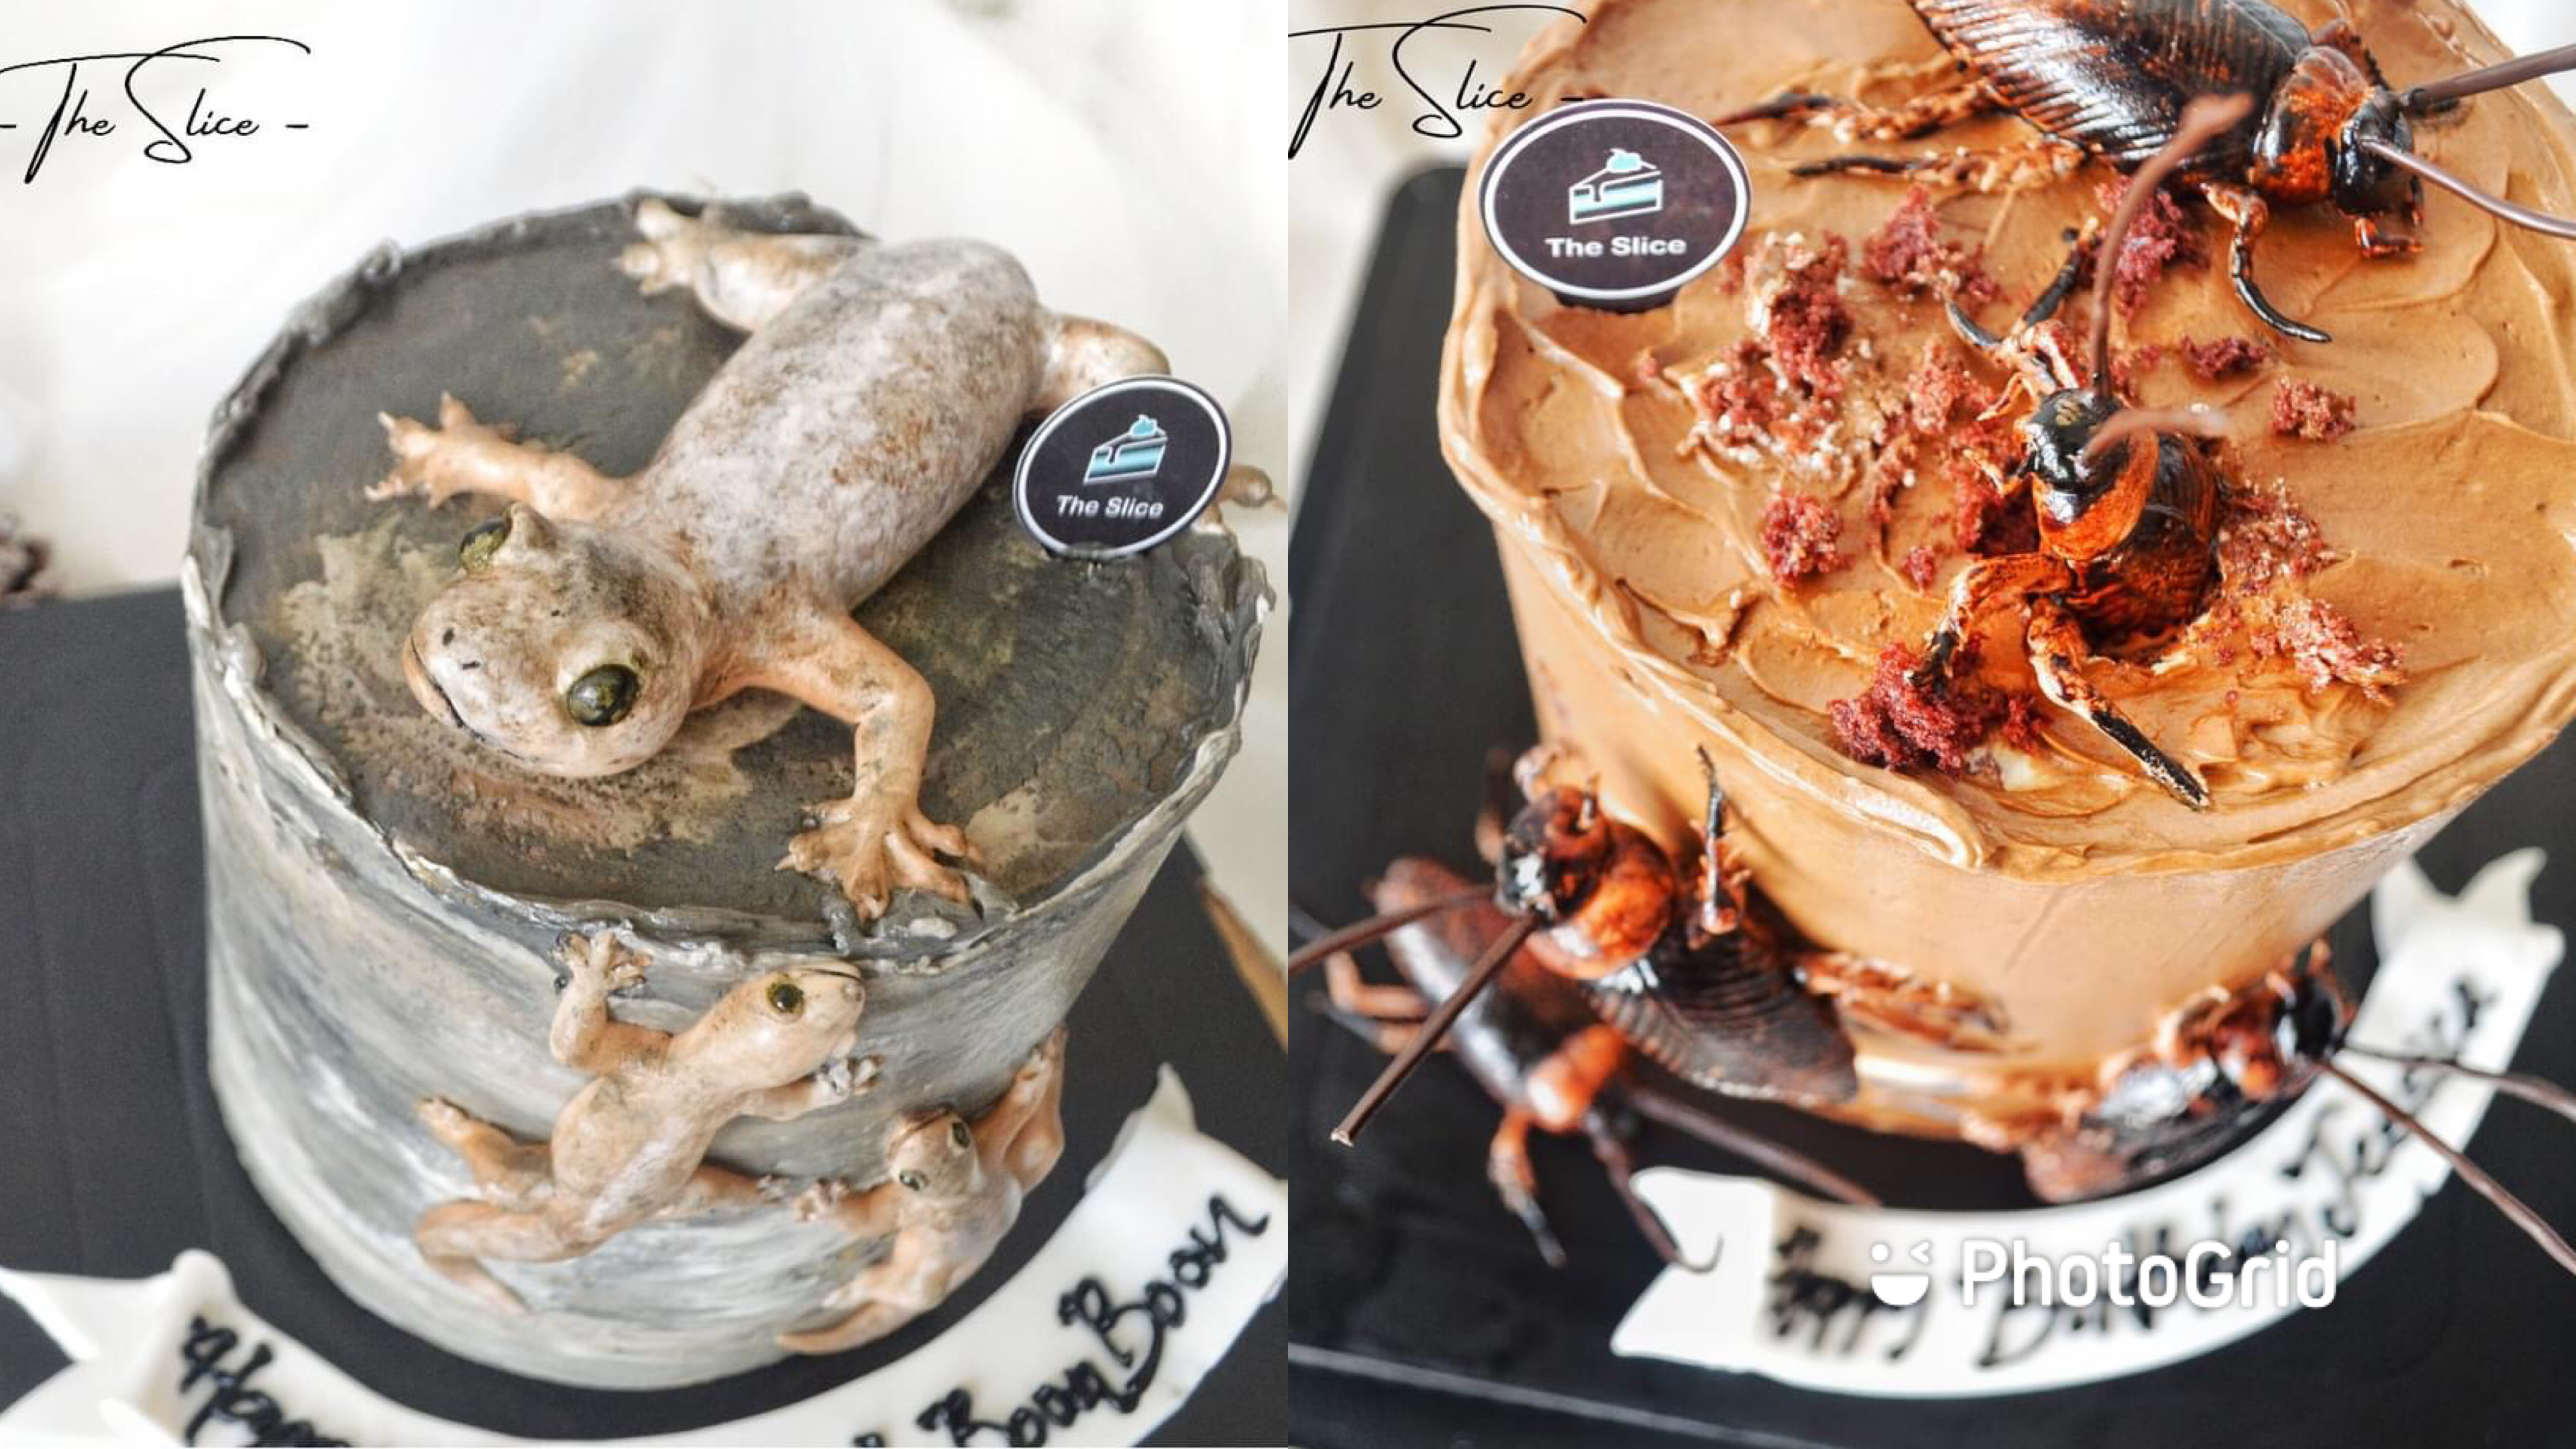 Home baker in Ipoh selling cakes with super-realistic, edible lizards &  cockroaches - Mothership.SG - News from Singapore, Asia and around the world